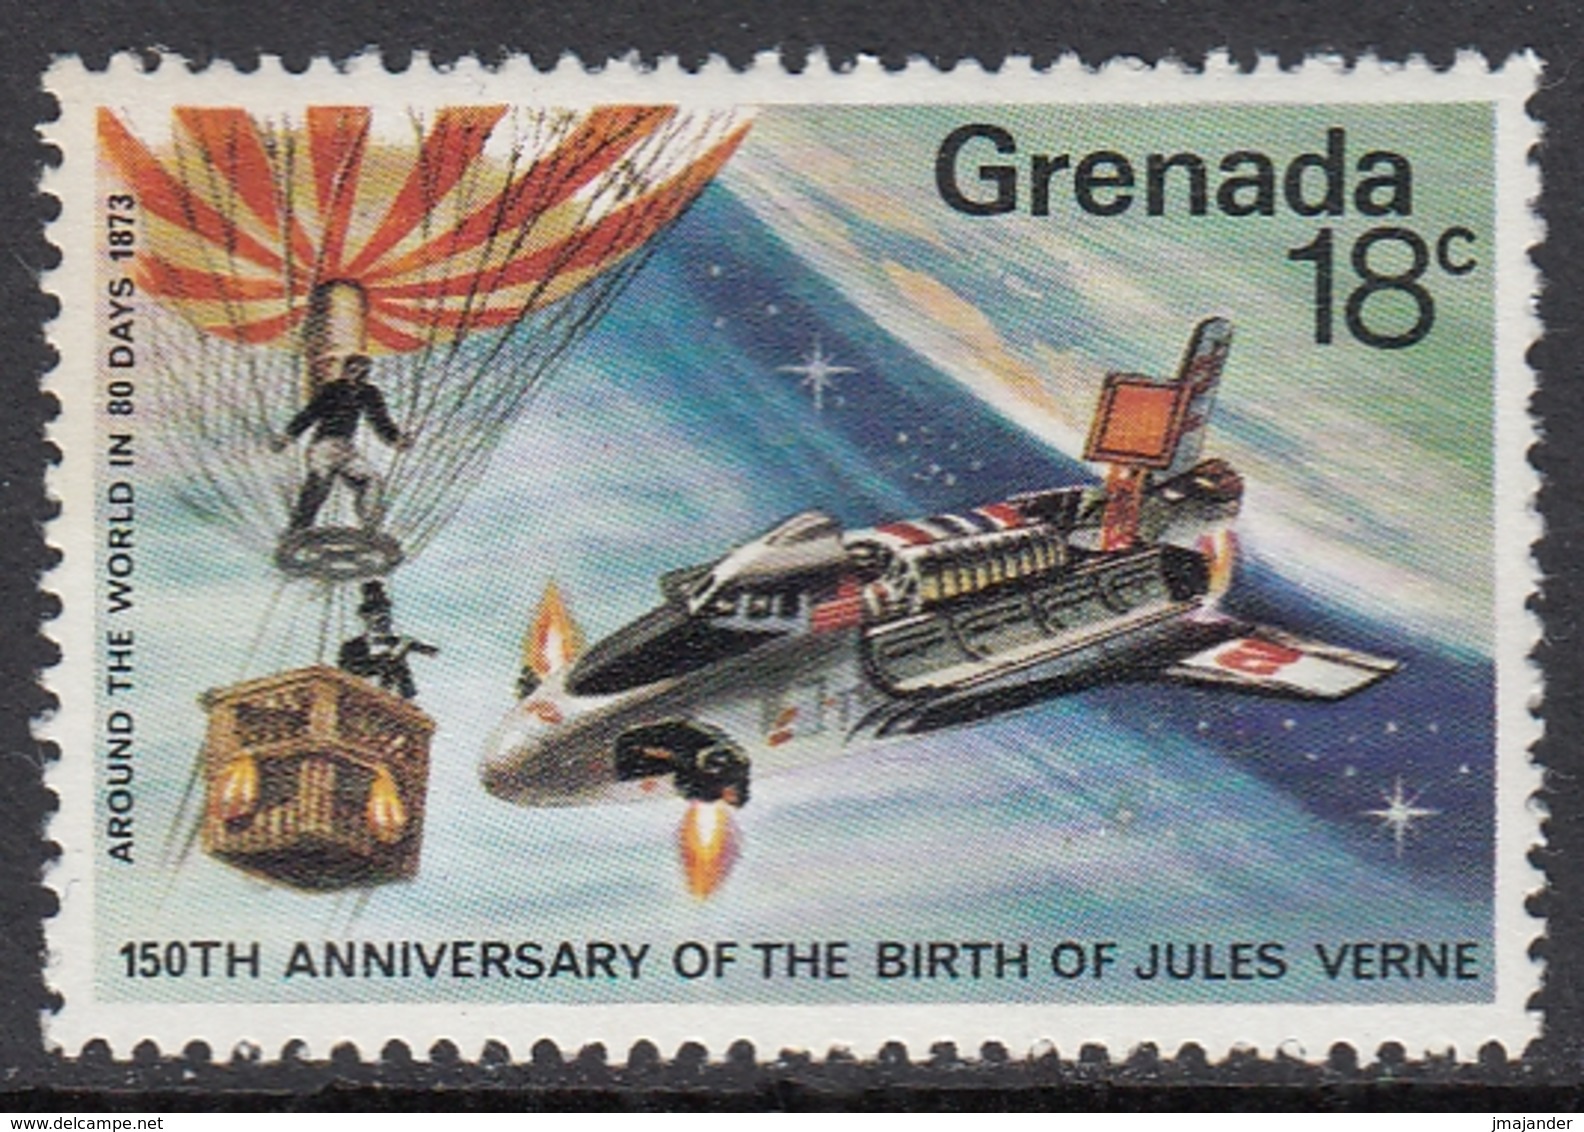 Grenada 1979 - The 150th Anniversary Of The Birth Of Jules Verne, Space Shuttle - Mi 951 ** MNH - Nordamerika